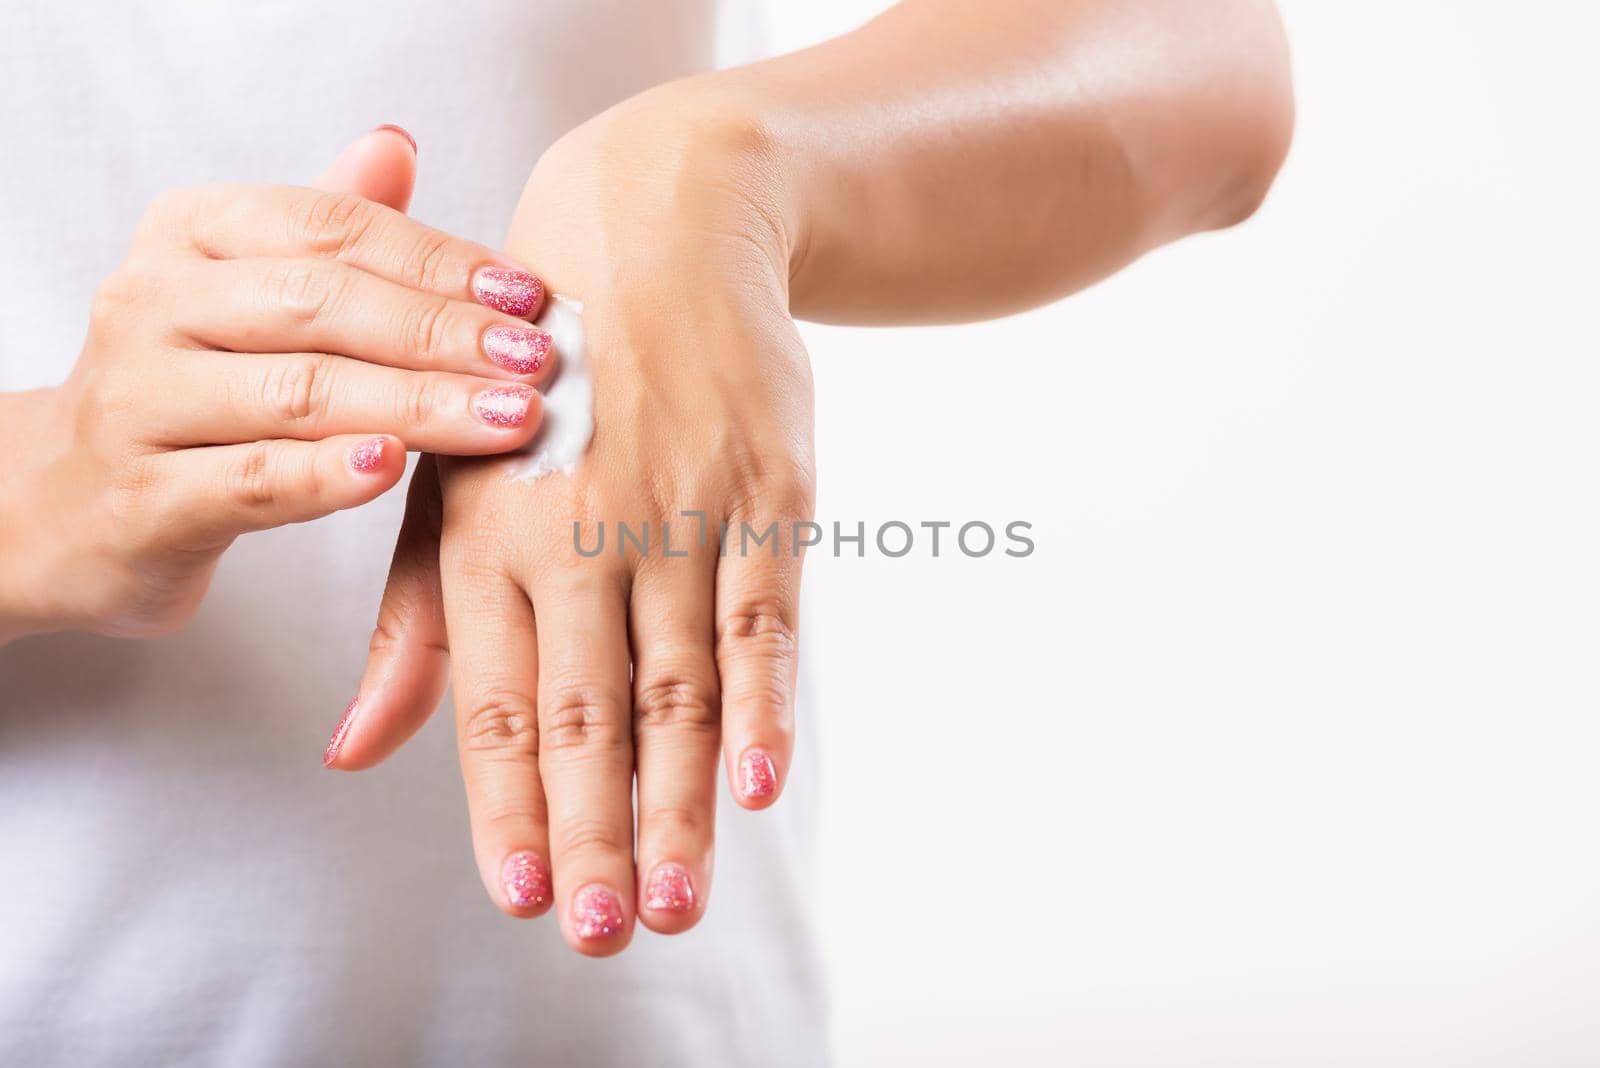 Woman applying lotion cosmetic moisturizer cream on her behind the palm skin hand by Sorapop